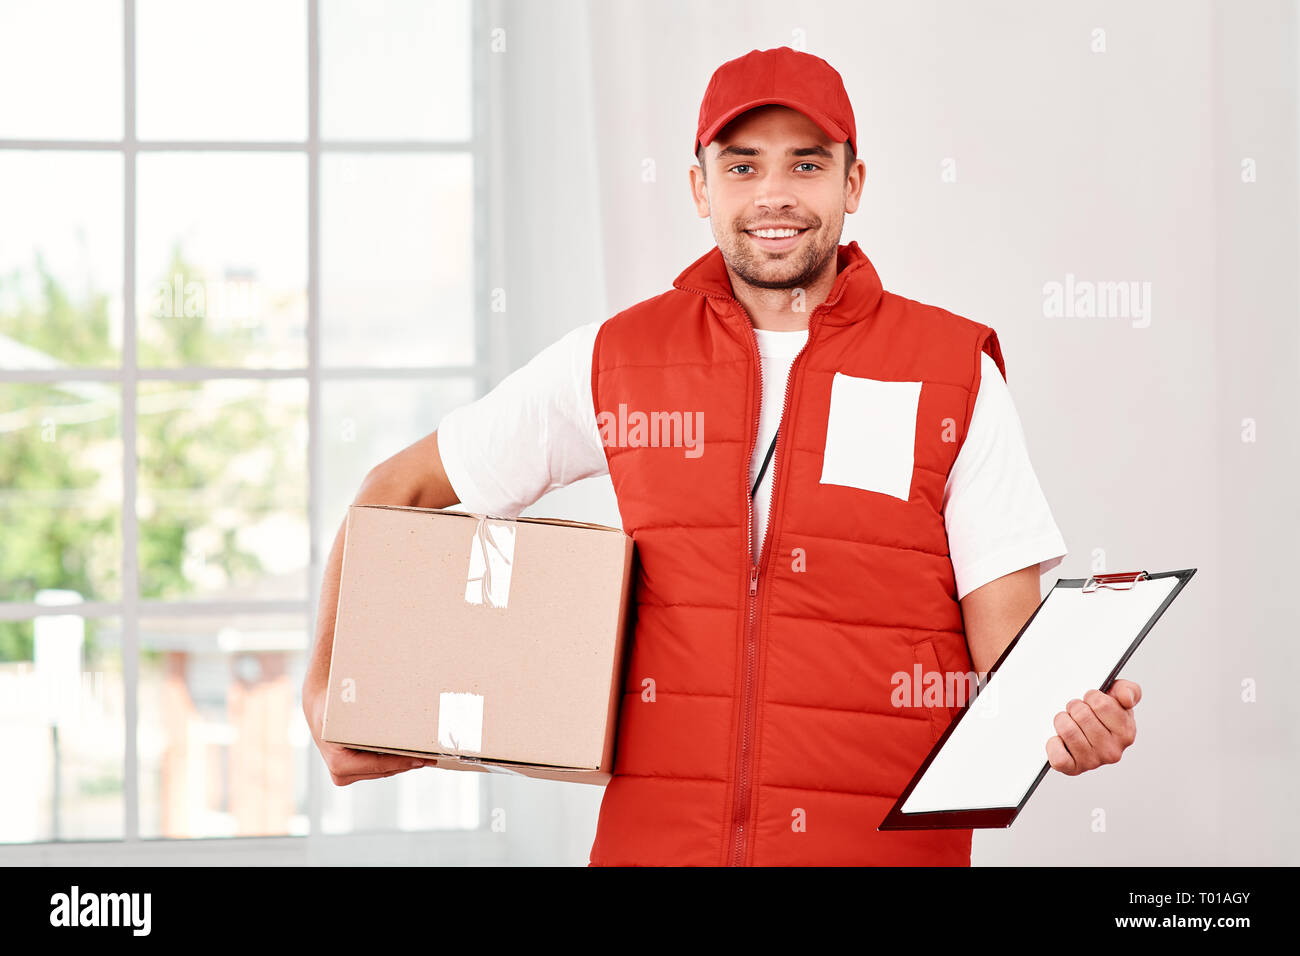 Cheerful postman wearing red postal uniform is delivering parcel to a client.  He holds carton box, folder and looking at the camera with a smile.  Friendly worker, high quality delivery service. Indoors.